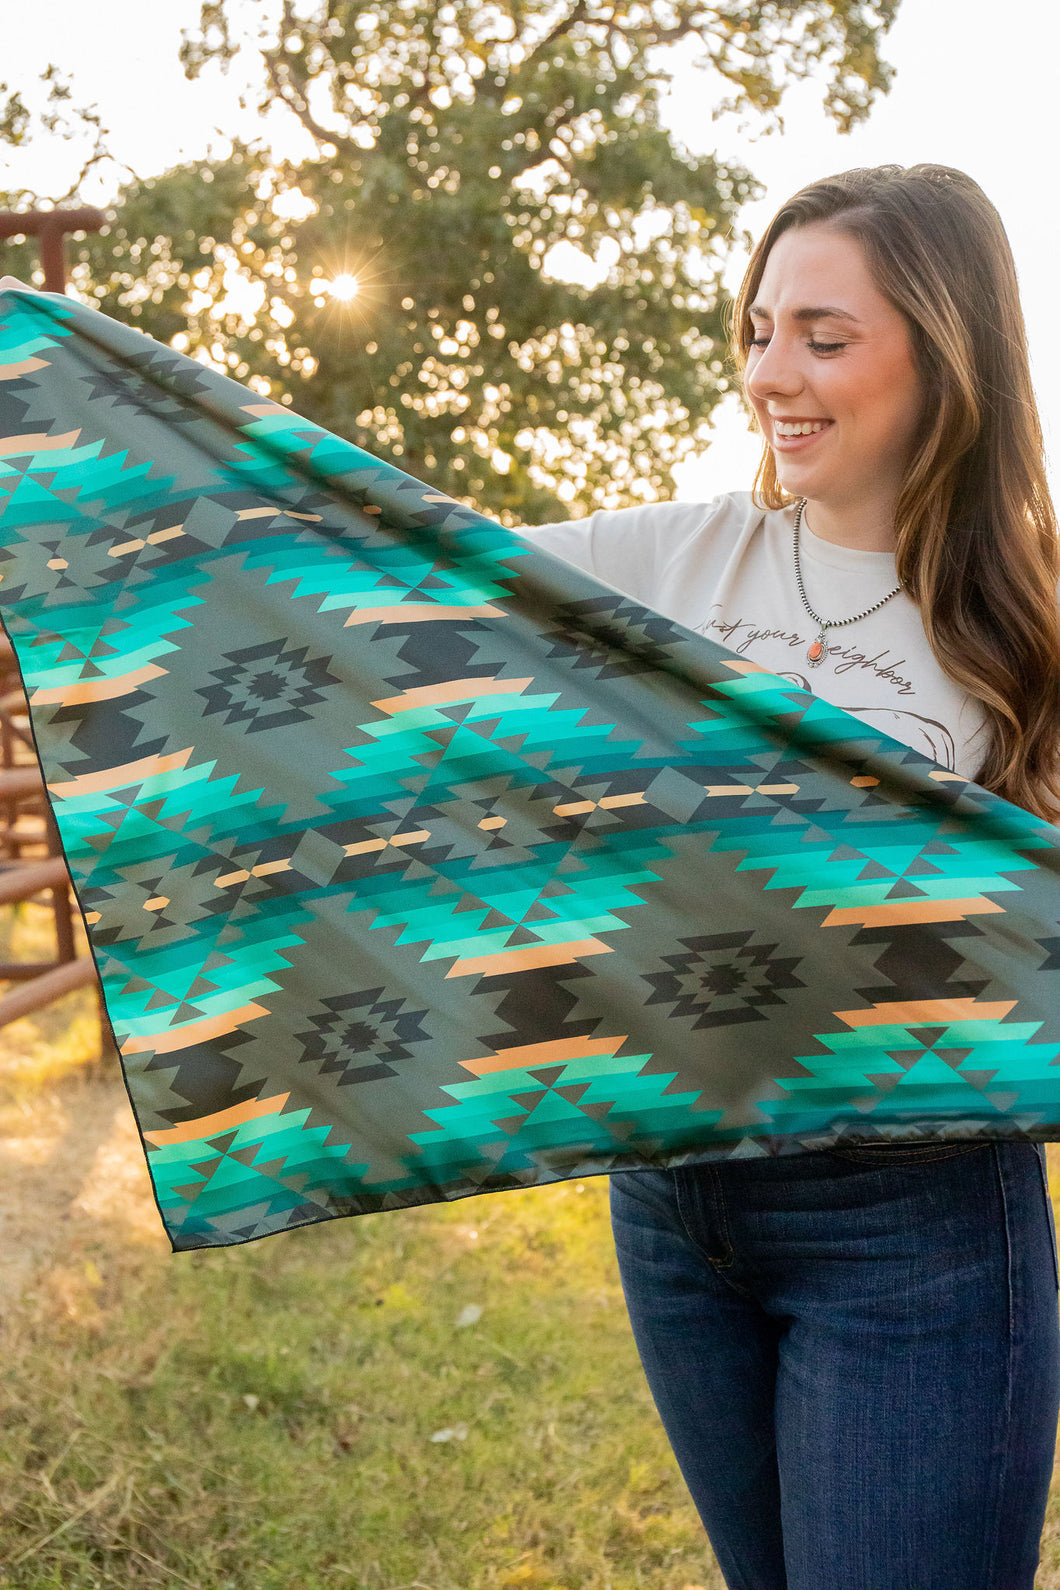 Charcoal Gray with Turquoise, Black, and Cream Large Aztec Wild Rag